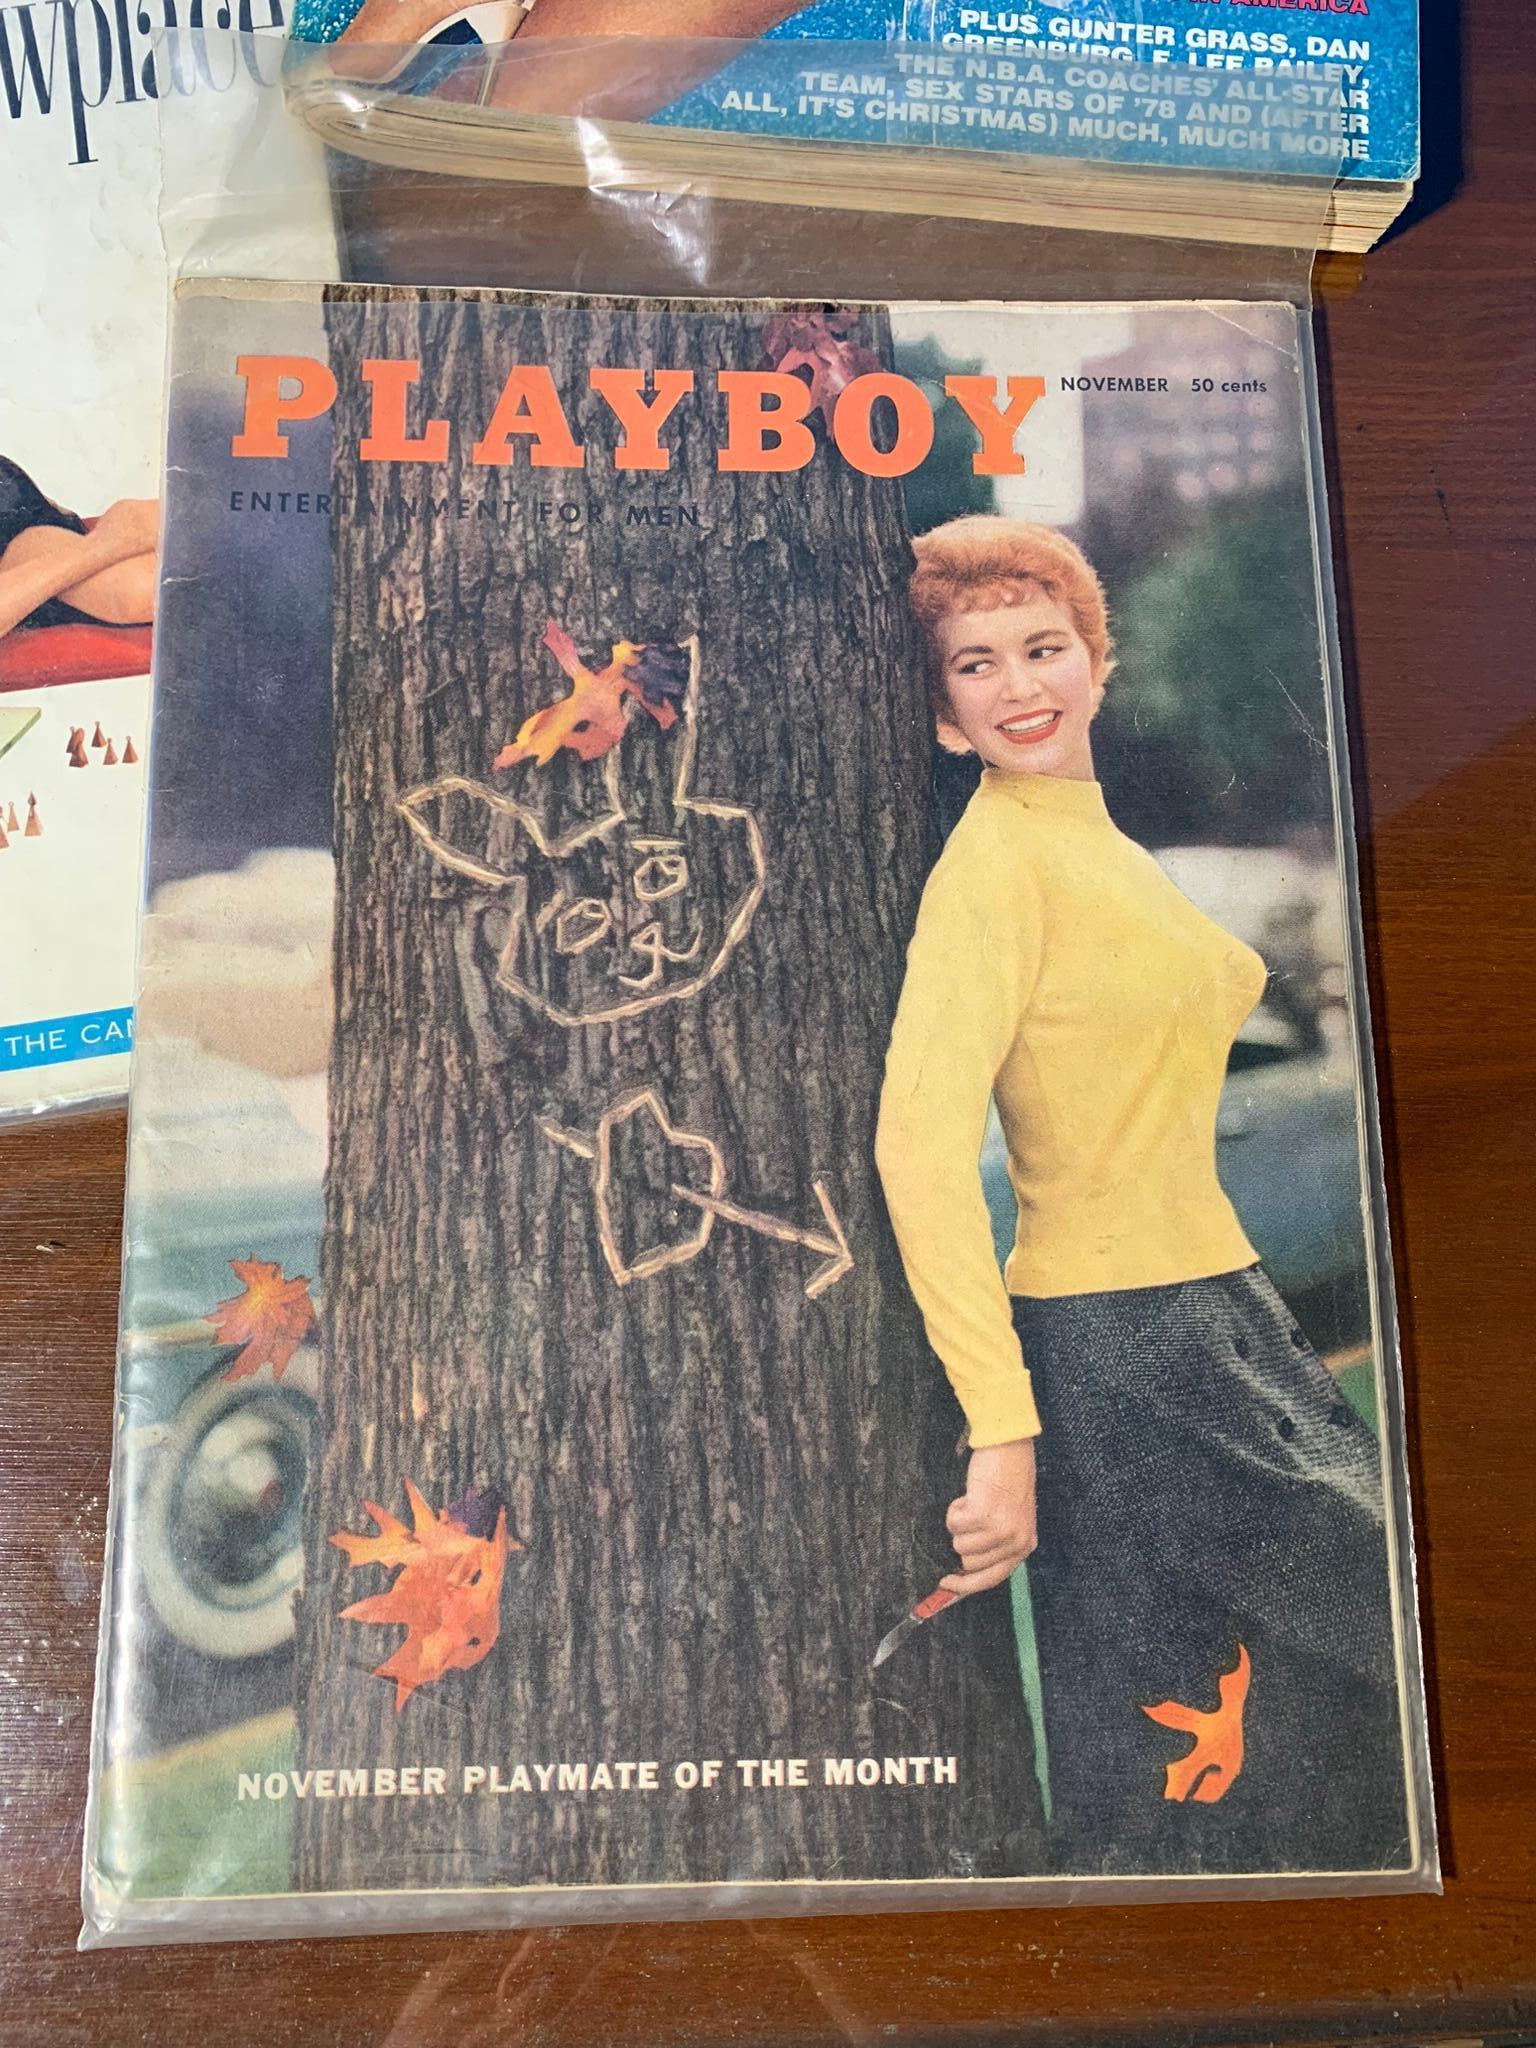 Group of Early Vintage Playboy Magazines '50s, '70s & '80s